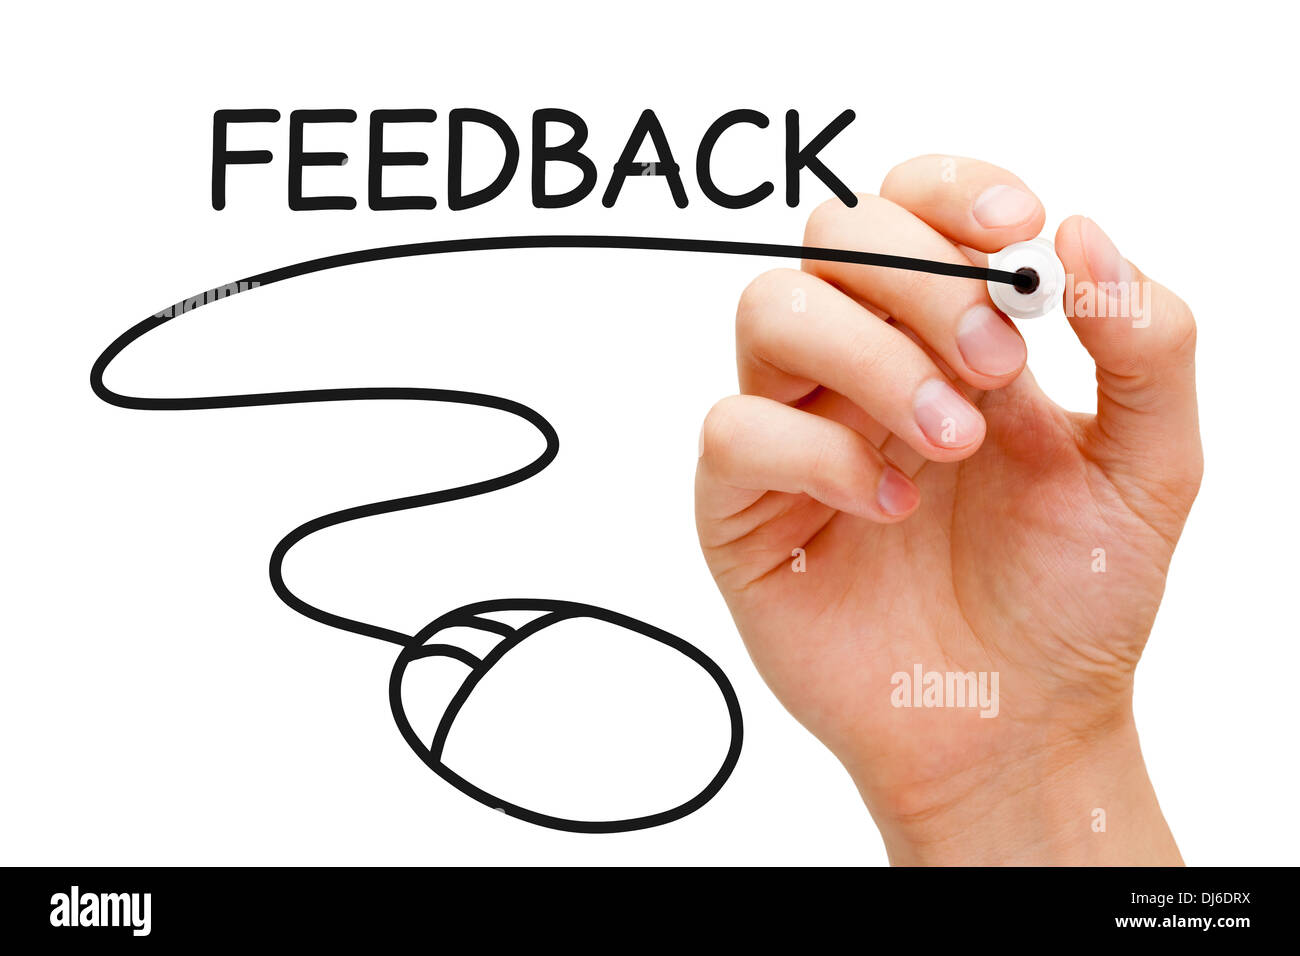 Hand sketching Feedback Mouse Concept with black marker on transparent wipe board. Stock Photo